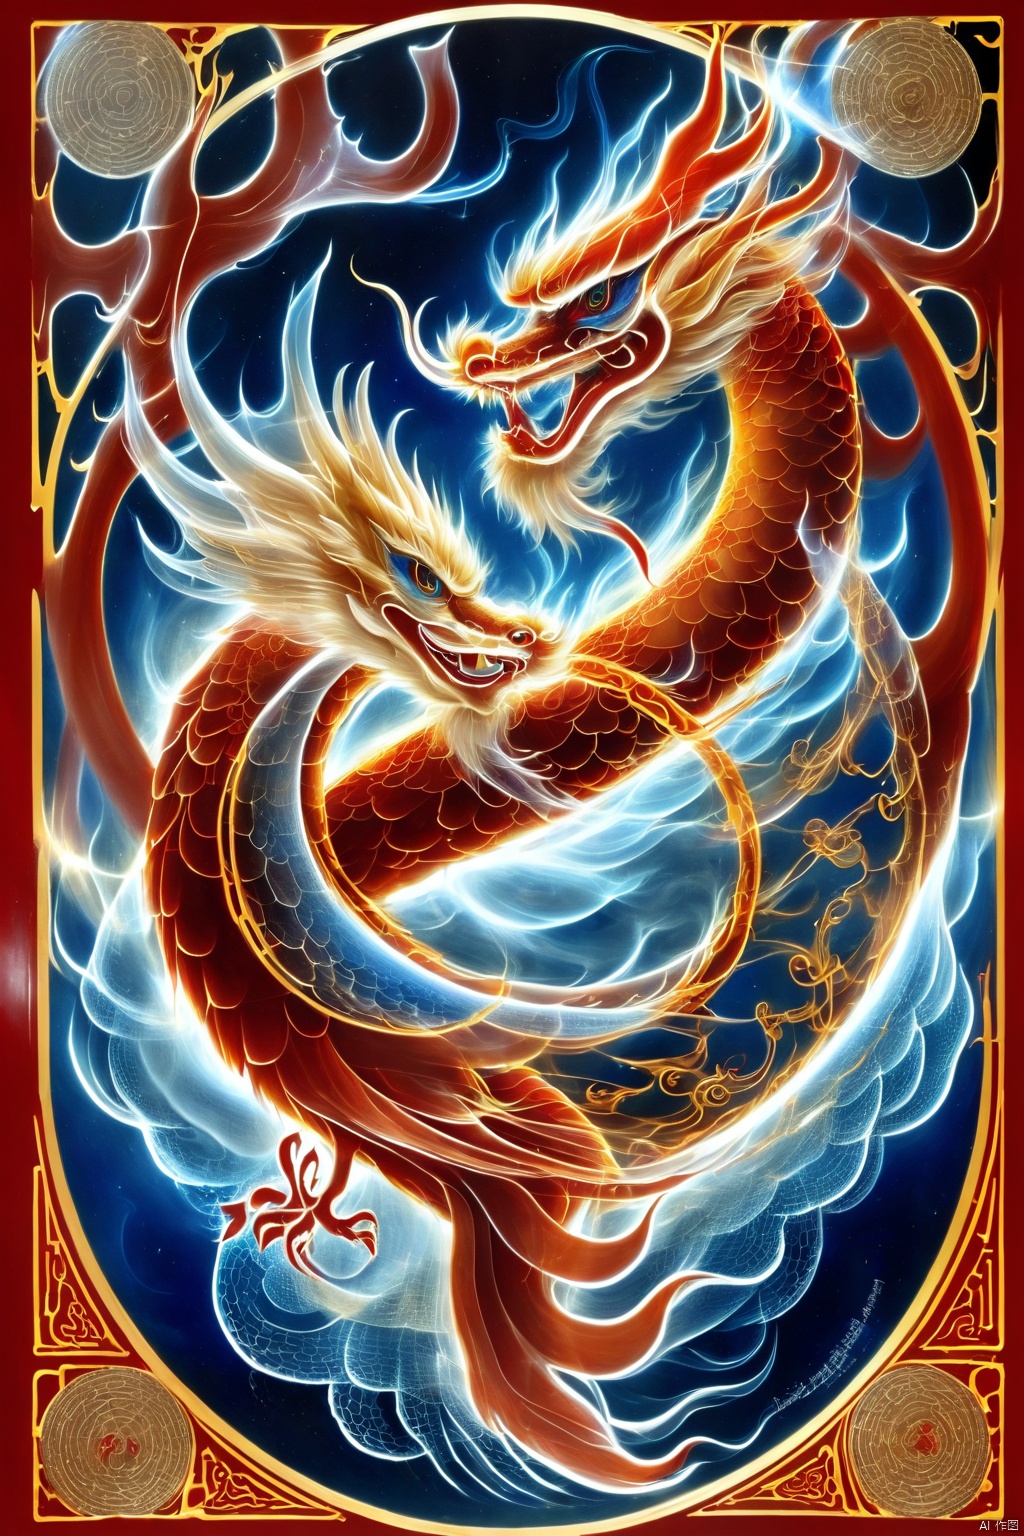  the union of a dragon and a phoenix foretells good fortune Dragon flying and phoenix dancing, dragon flying and phoenix flying and phoenix flying and phoenix flying and phoenix flying.